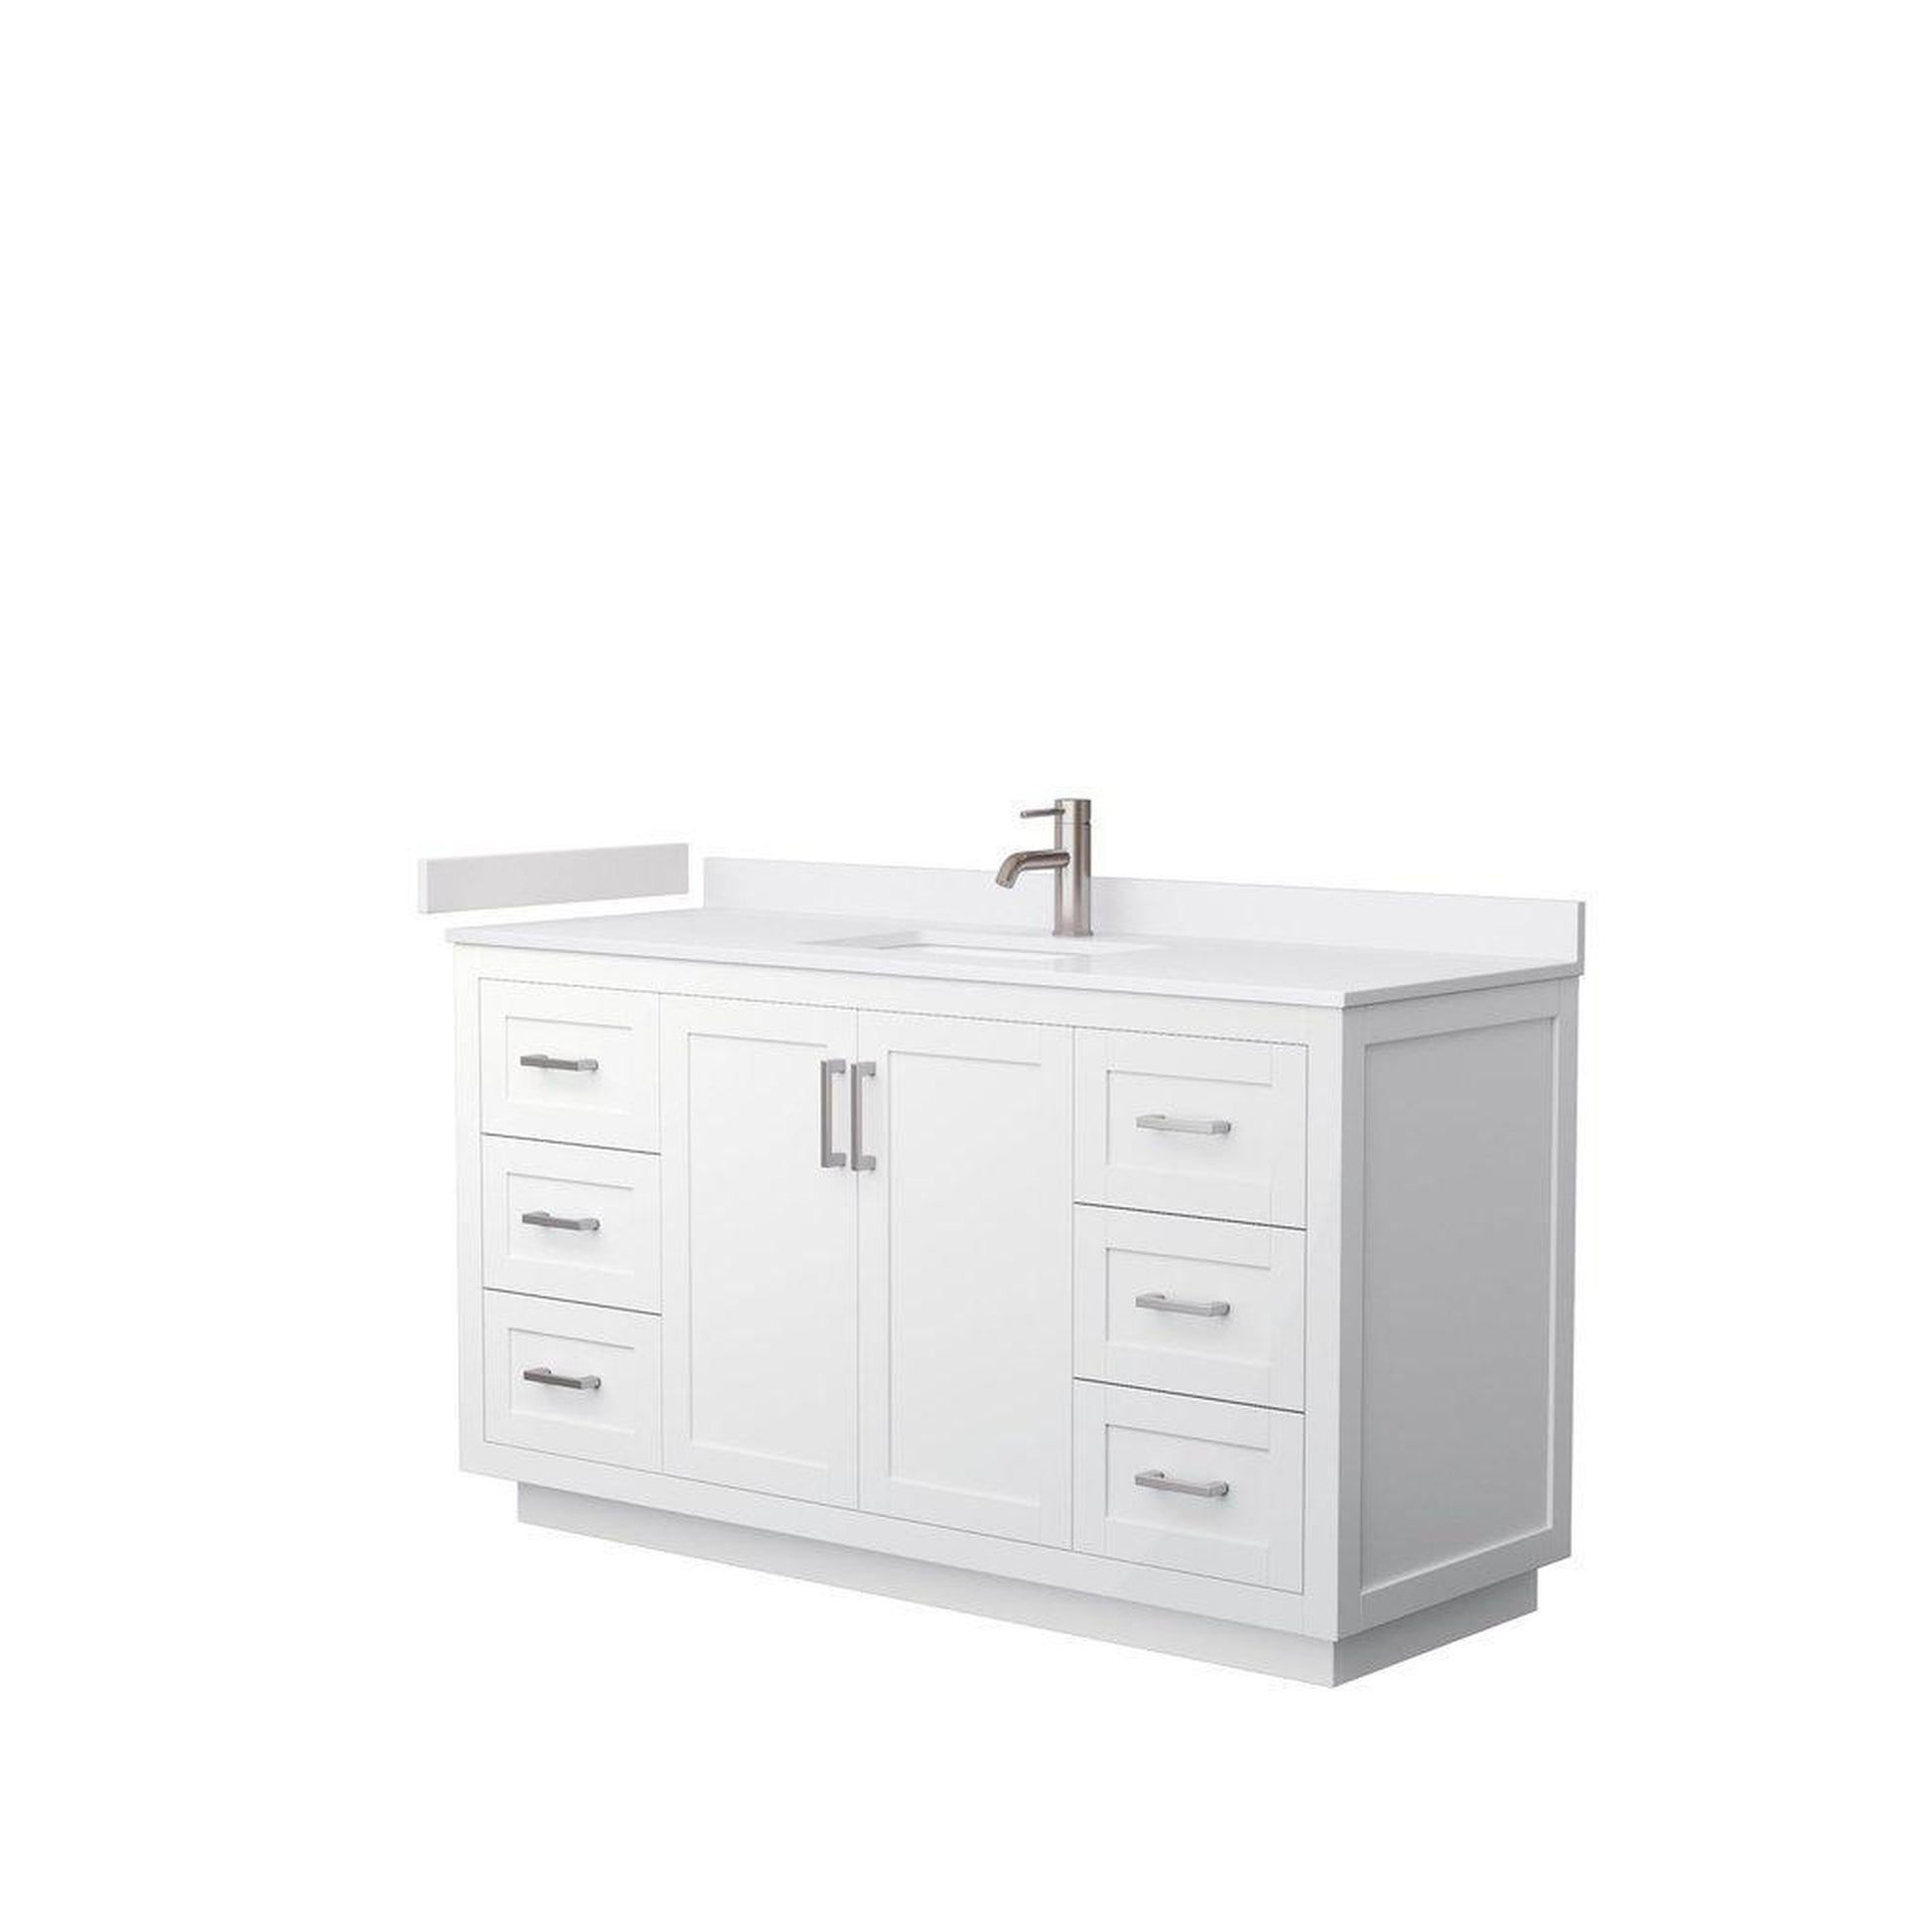 Wyndham Collection Miranda 60" Single Bathroom White Vanity Set With White Cultured Marble Countertop, Undermount Square Sink, And Brushed Nickel Trim